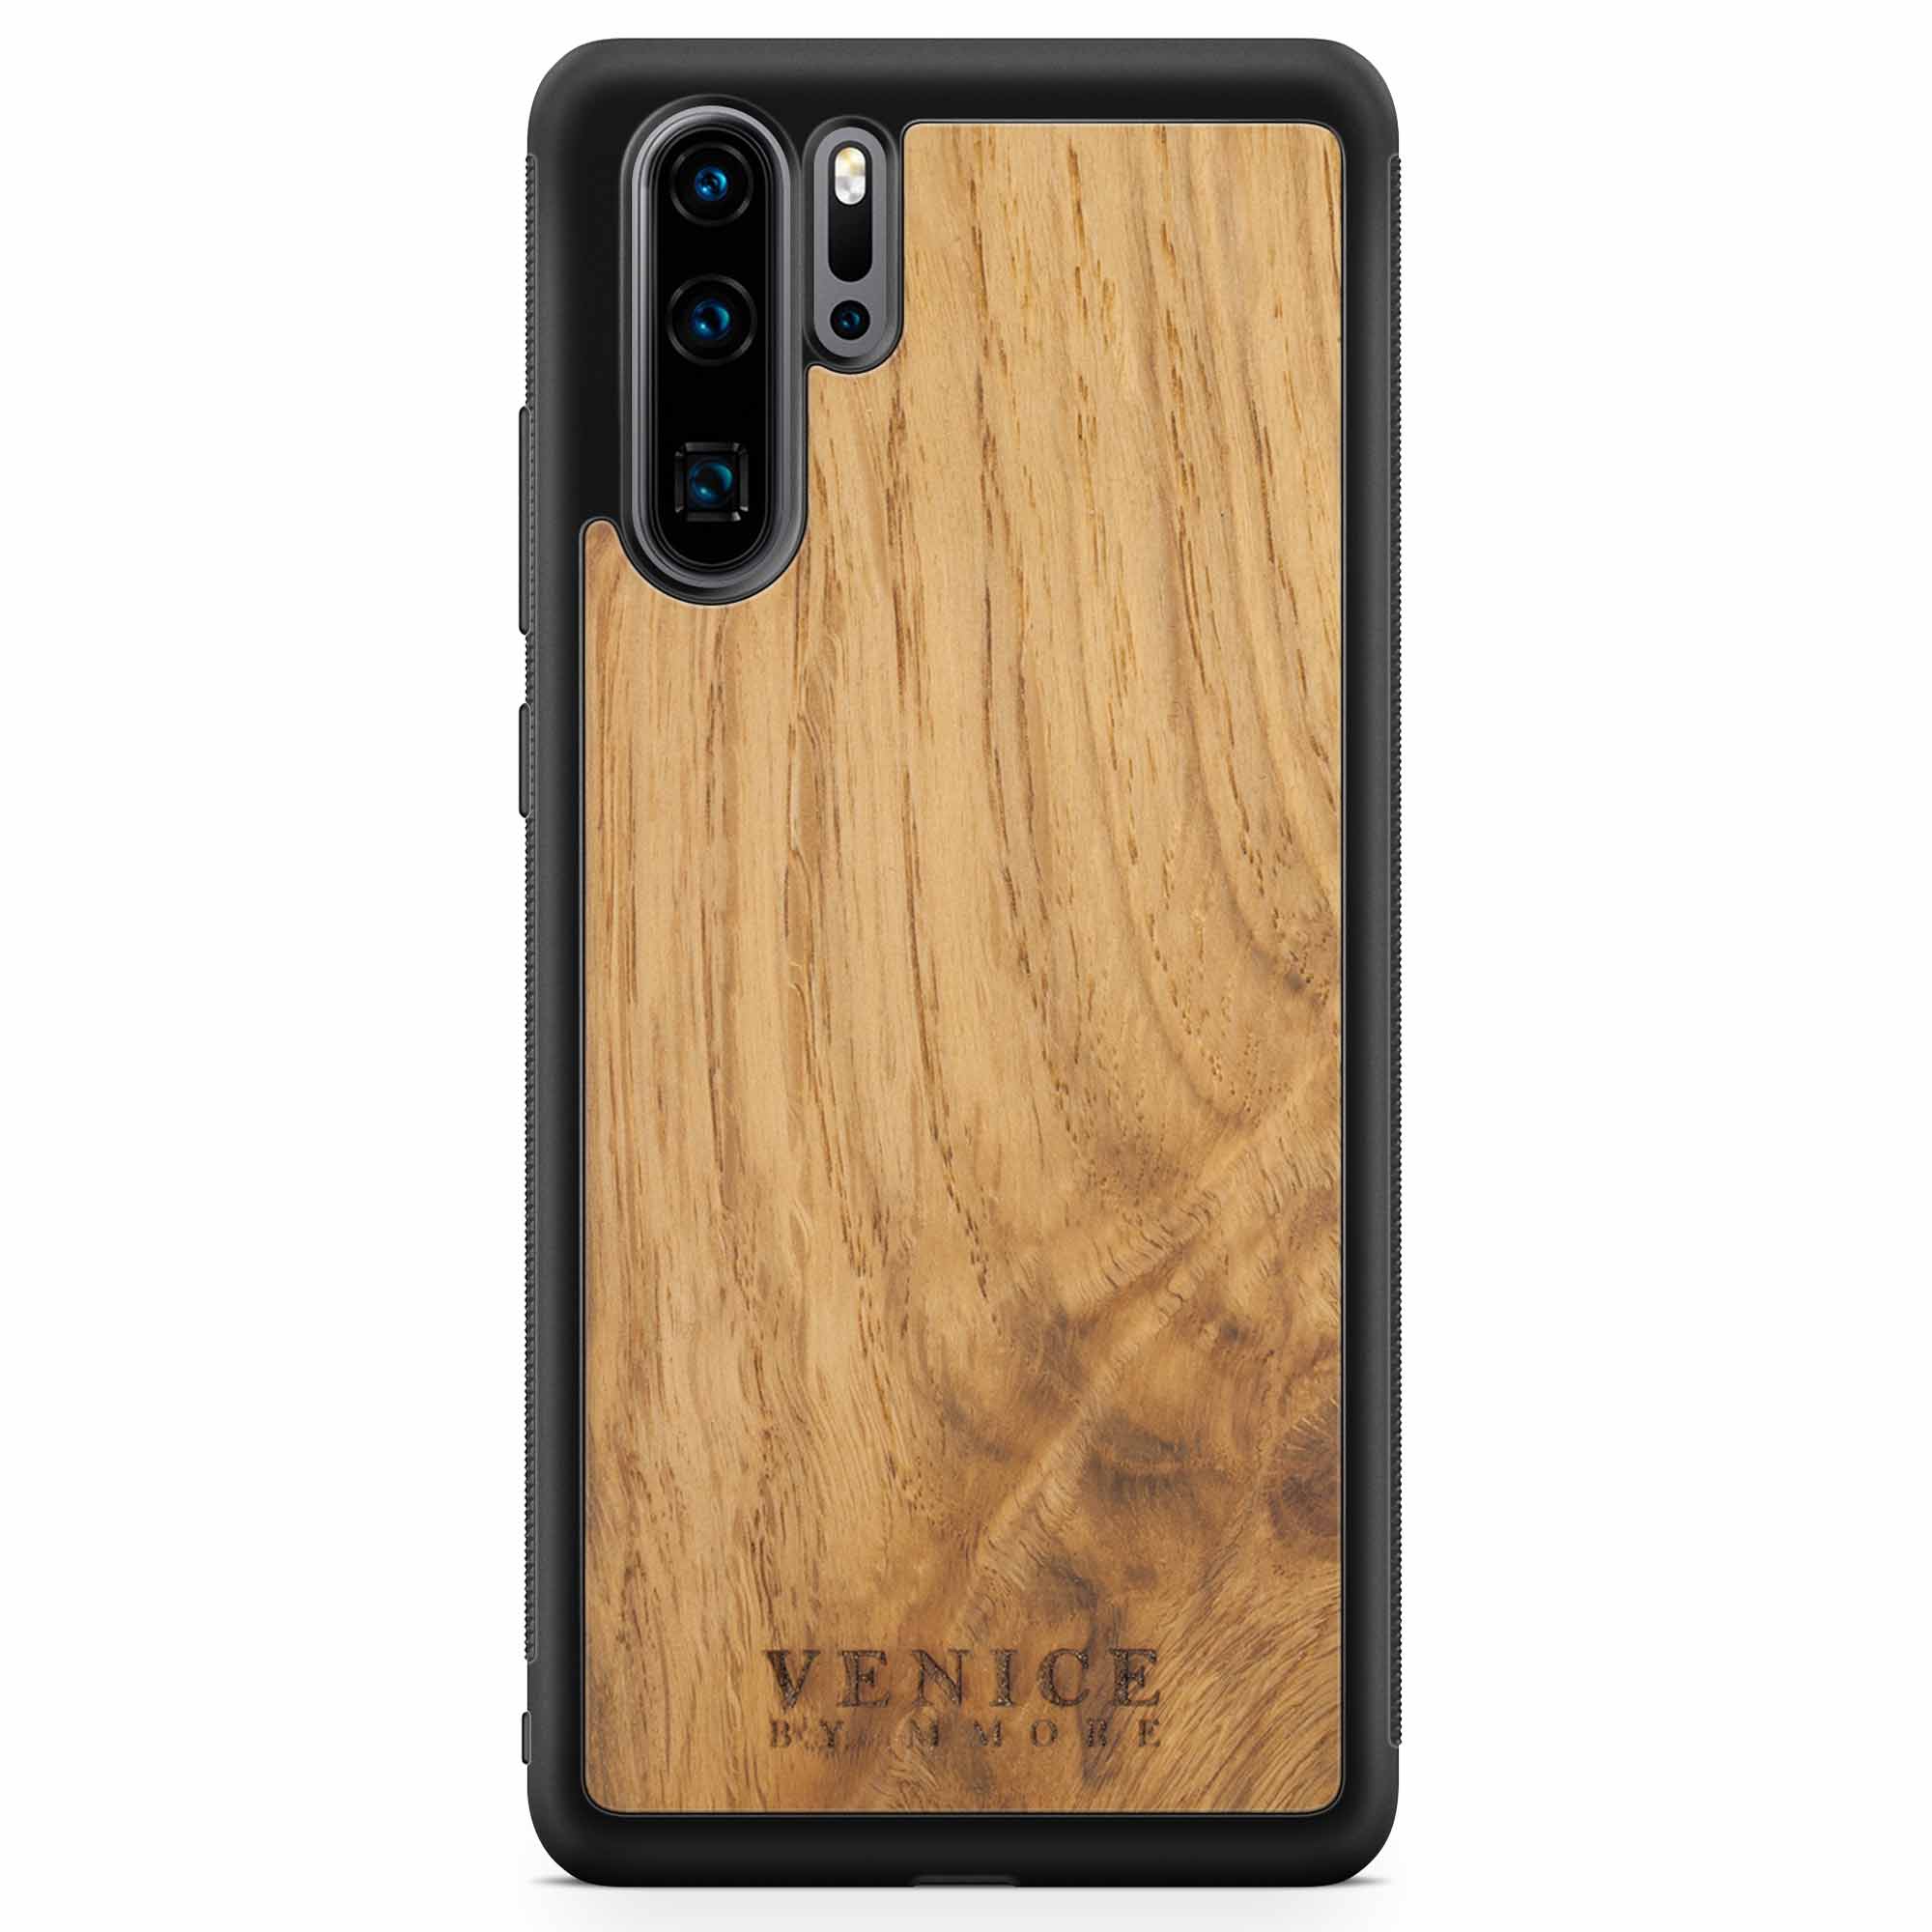 Venice Lettering Wood Phone Case Huawei P30 Pro